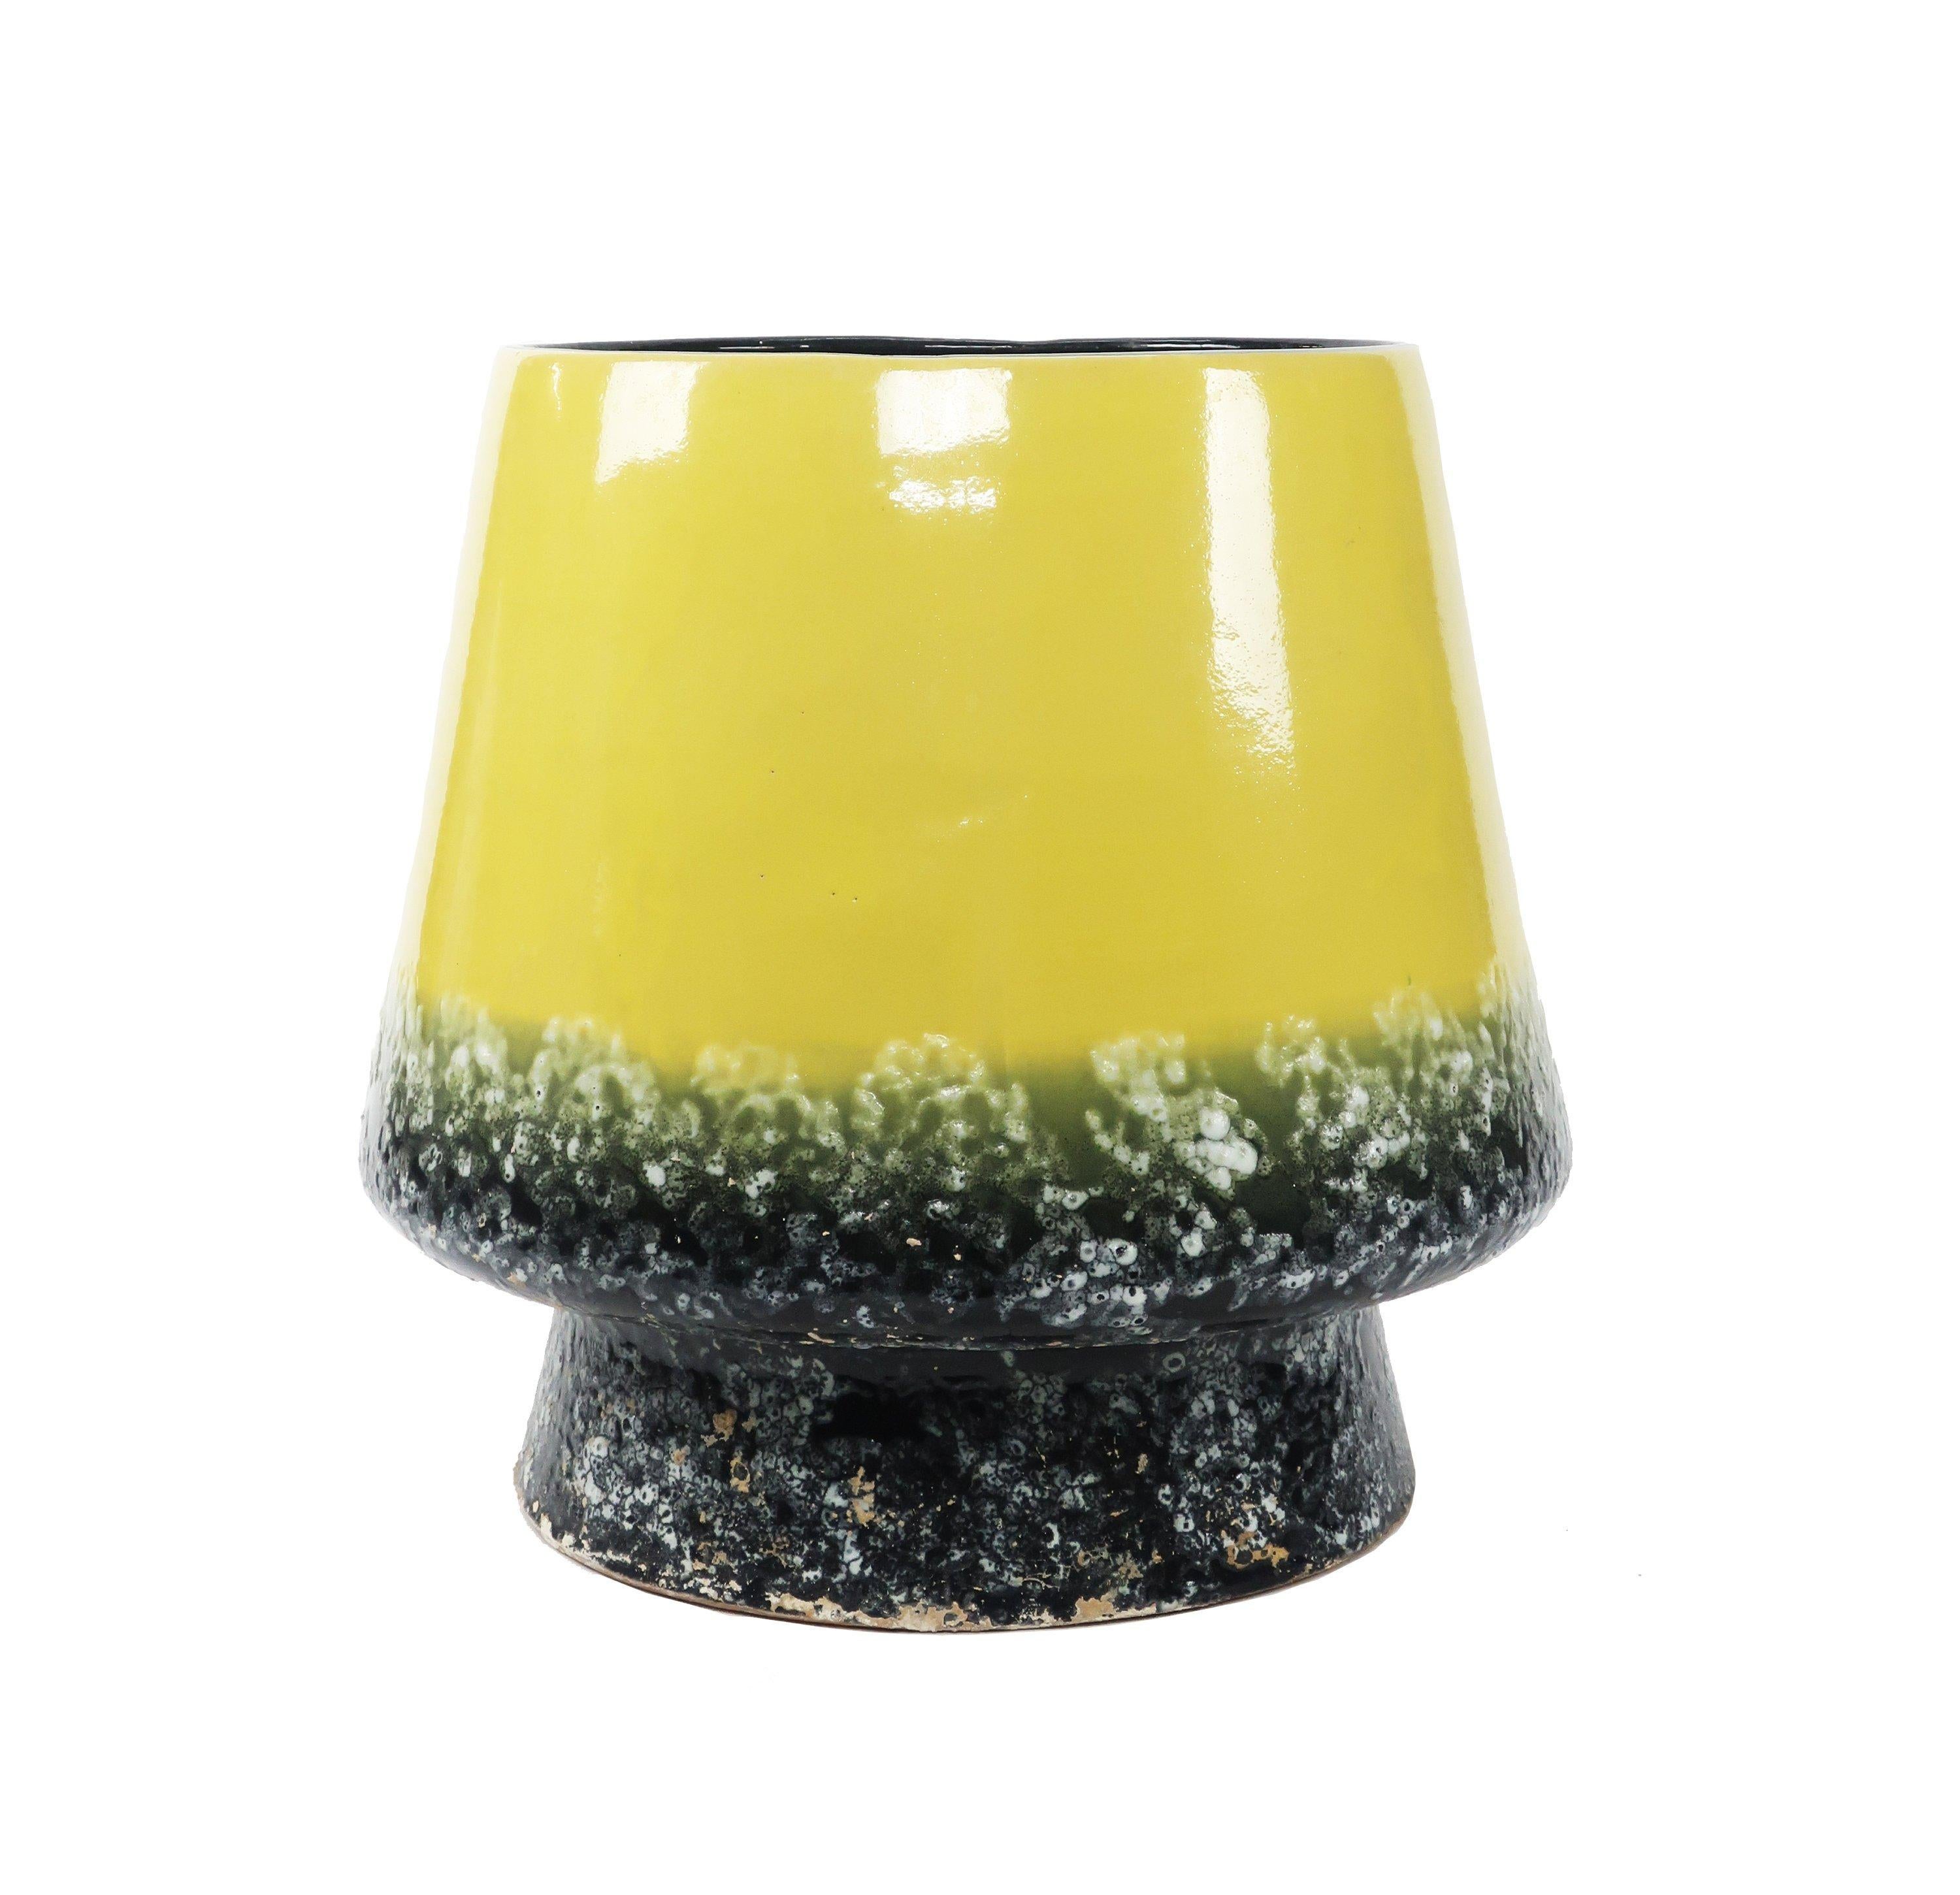 A stunning extra large Mid-Century Modern ceramic planter in the “Fat Lava” style (a very tactile textured exterior) with a bright yellow glaze that fades into a rich dark brown/black at the base

In excellent vintage condition.

Measures: 18